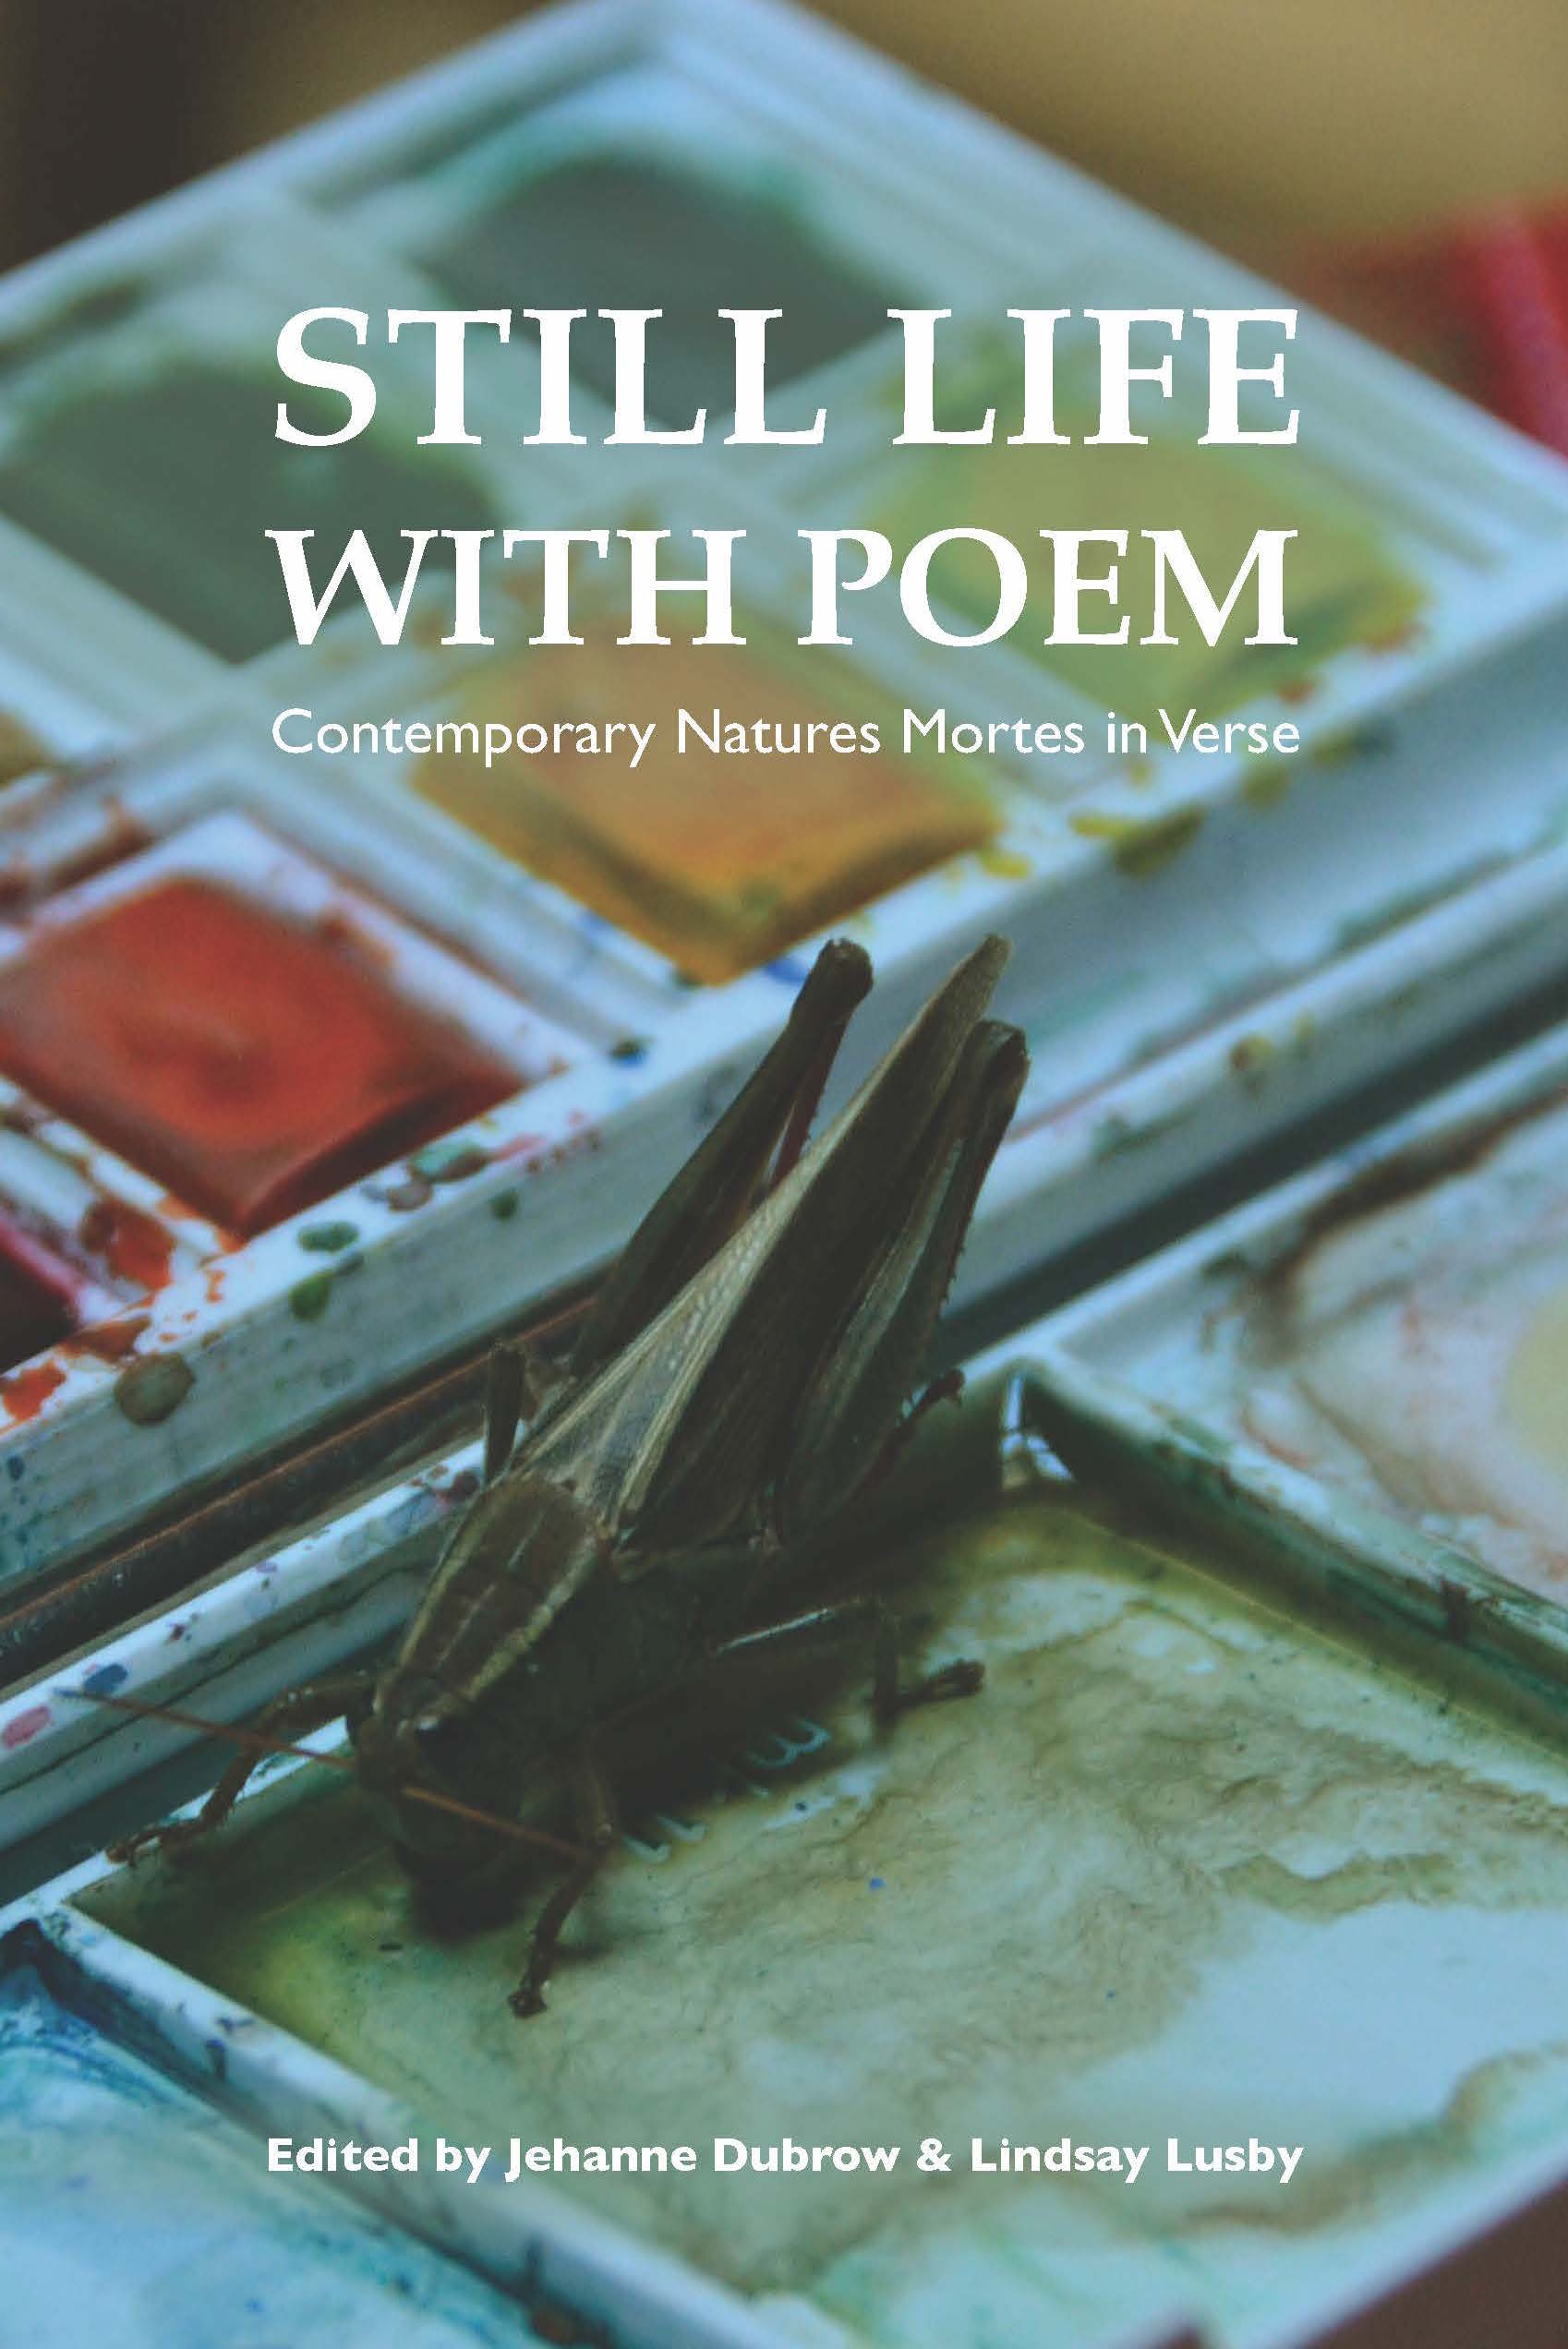 Book Cover of Still Life with Poem